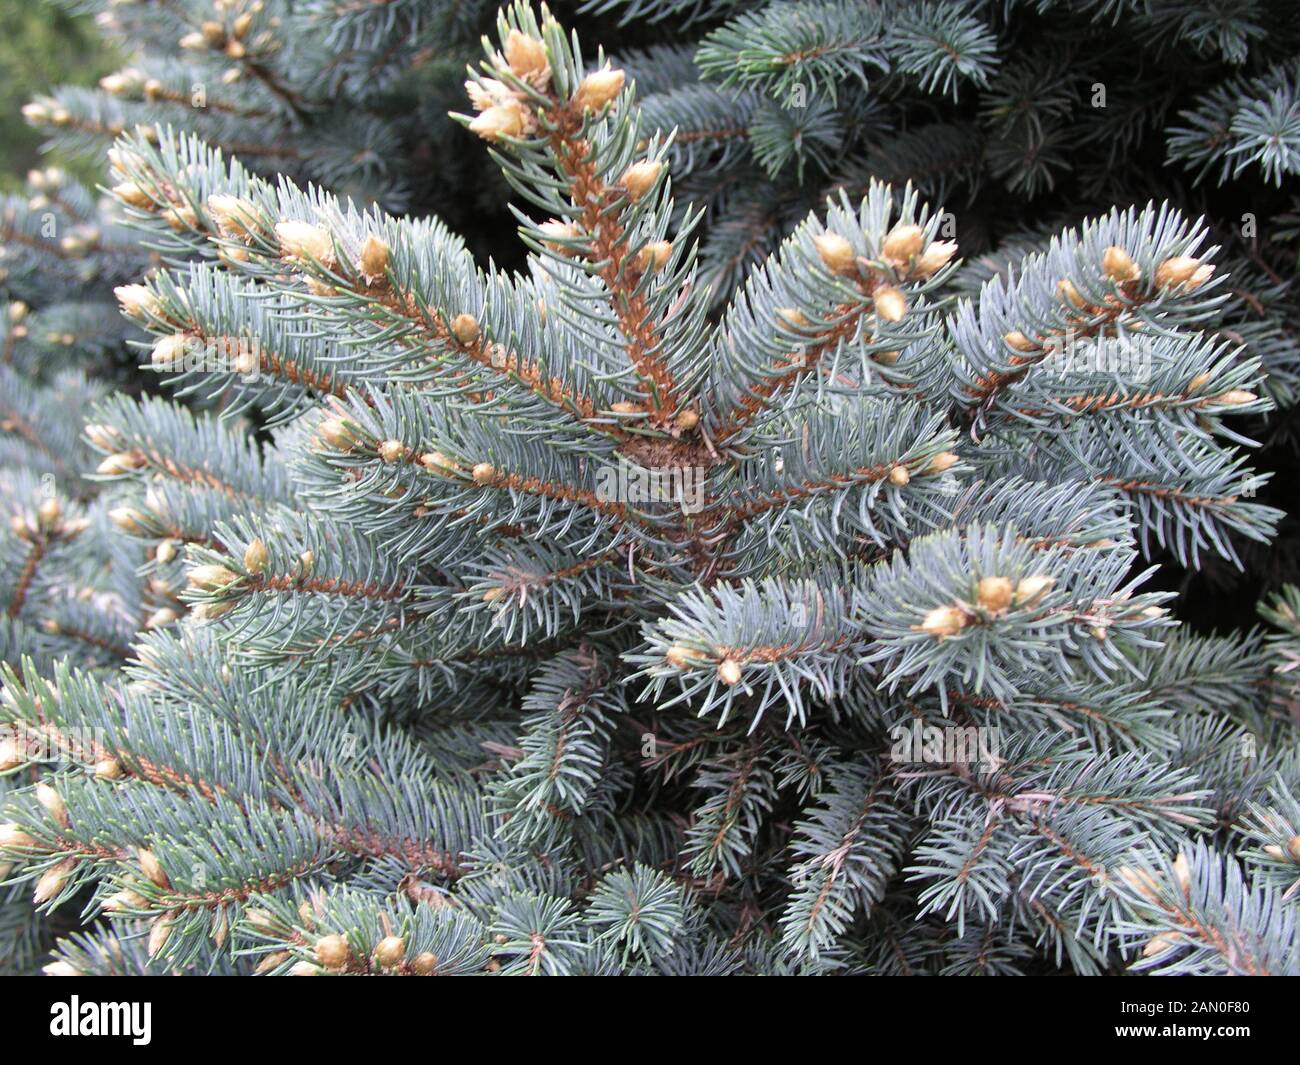 PICEA PUNGENS FOLIAGE Stock Photo